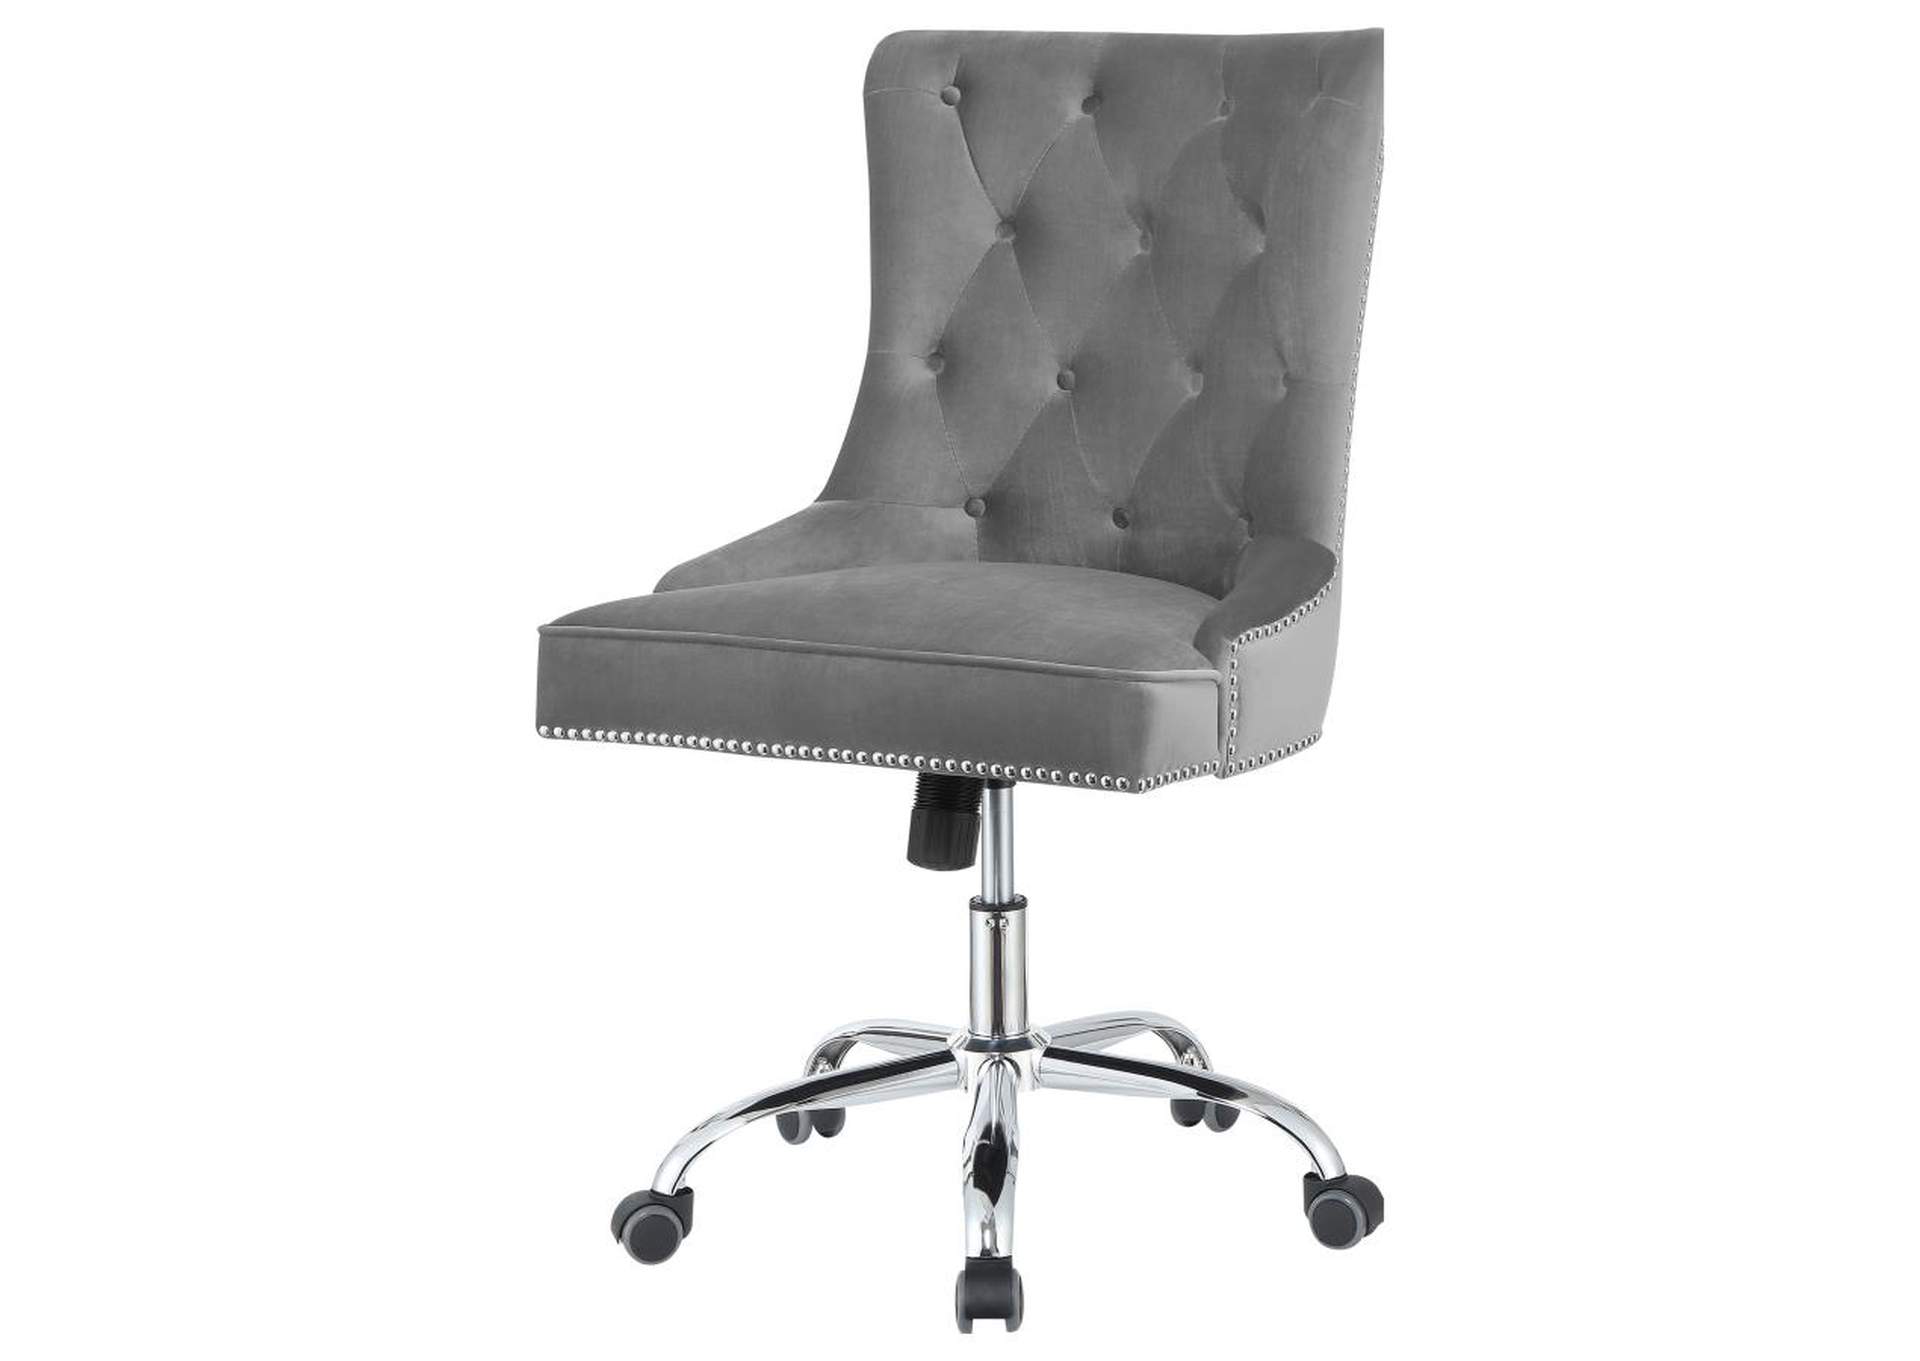 Tufted Back Office Chair Grey and Chrome,Coaster Furniture